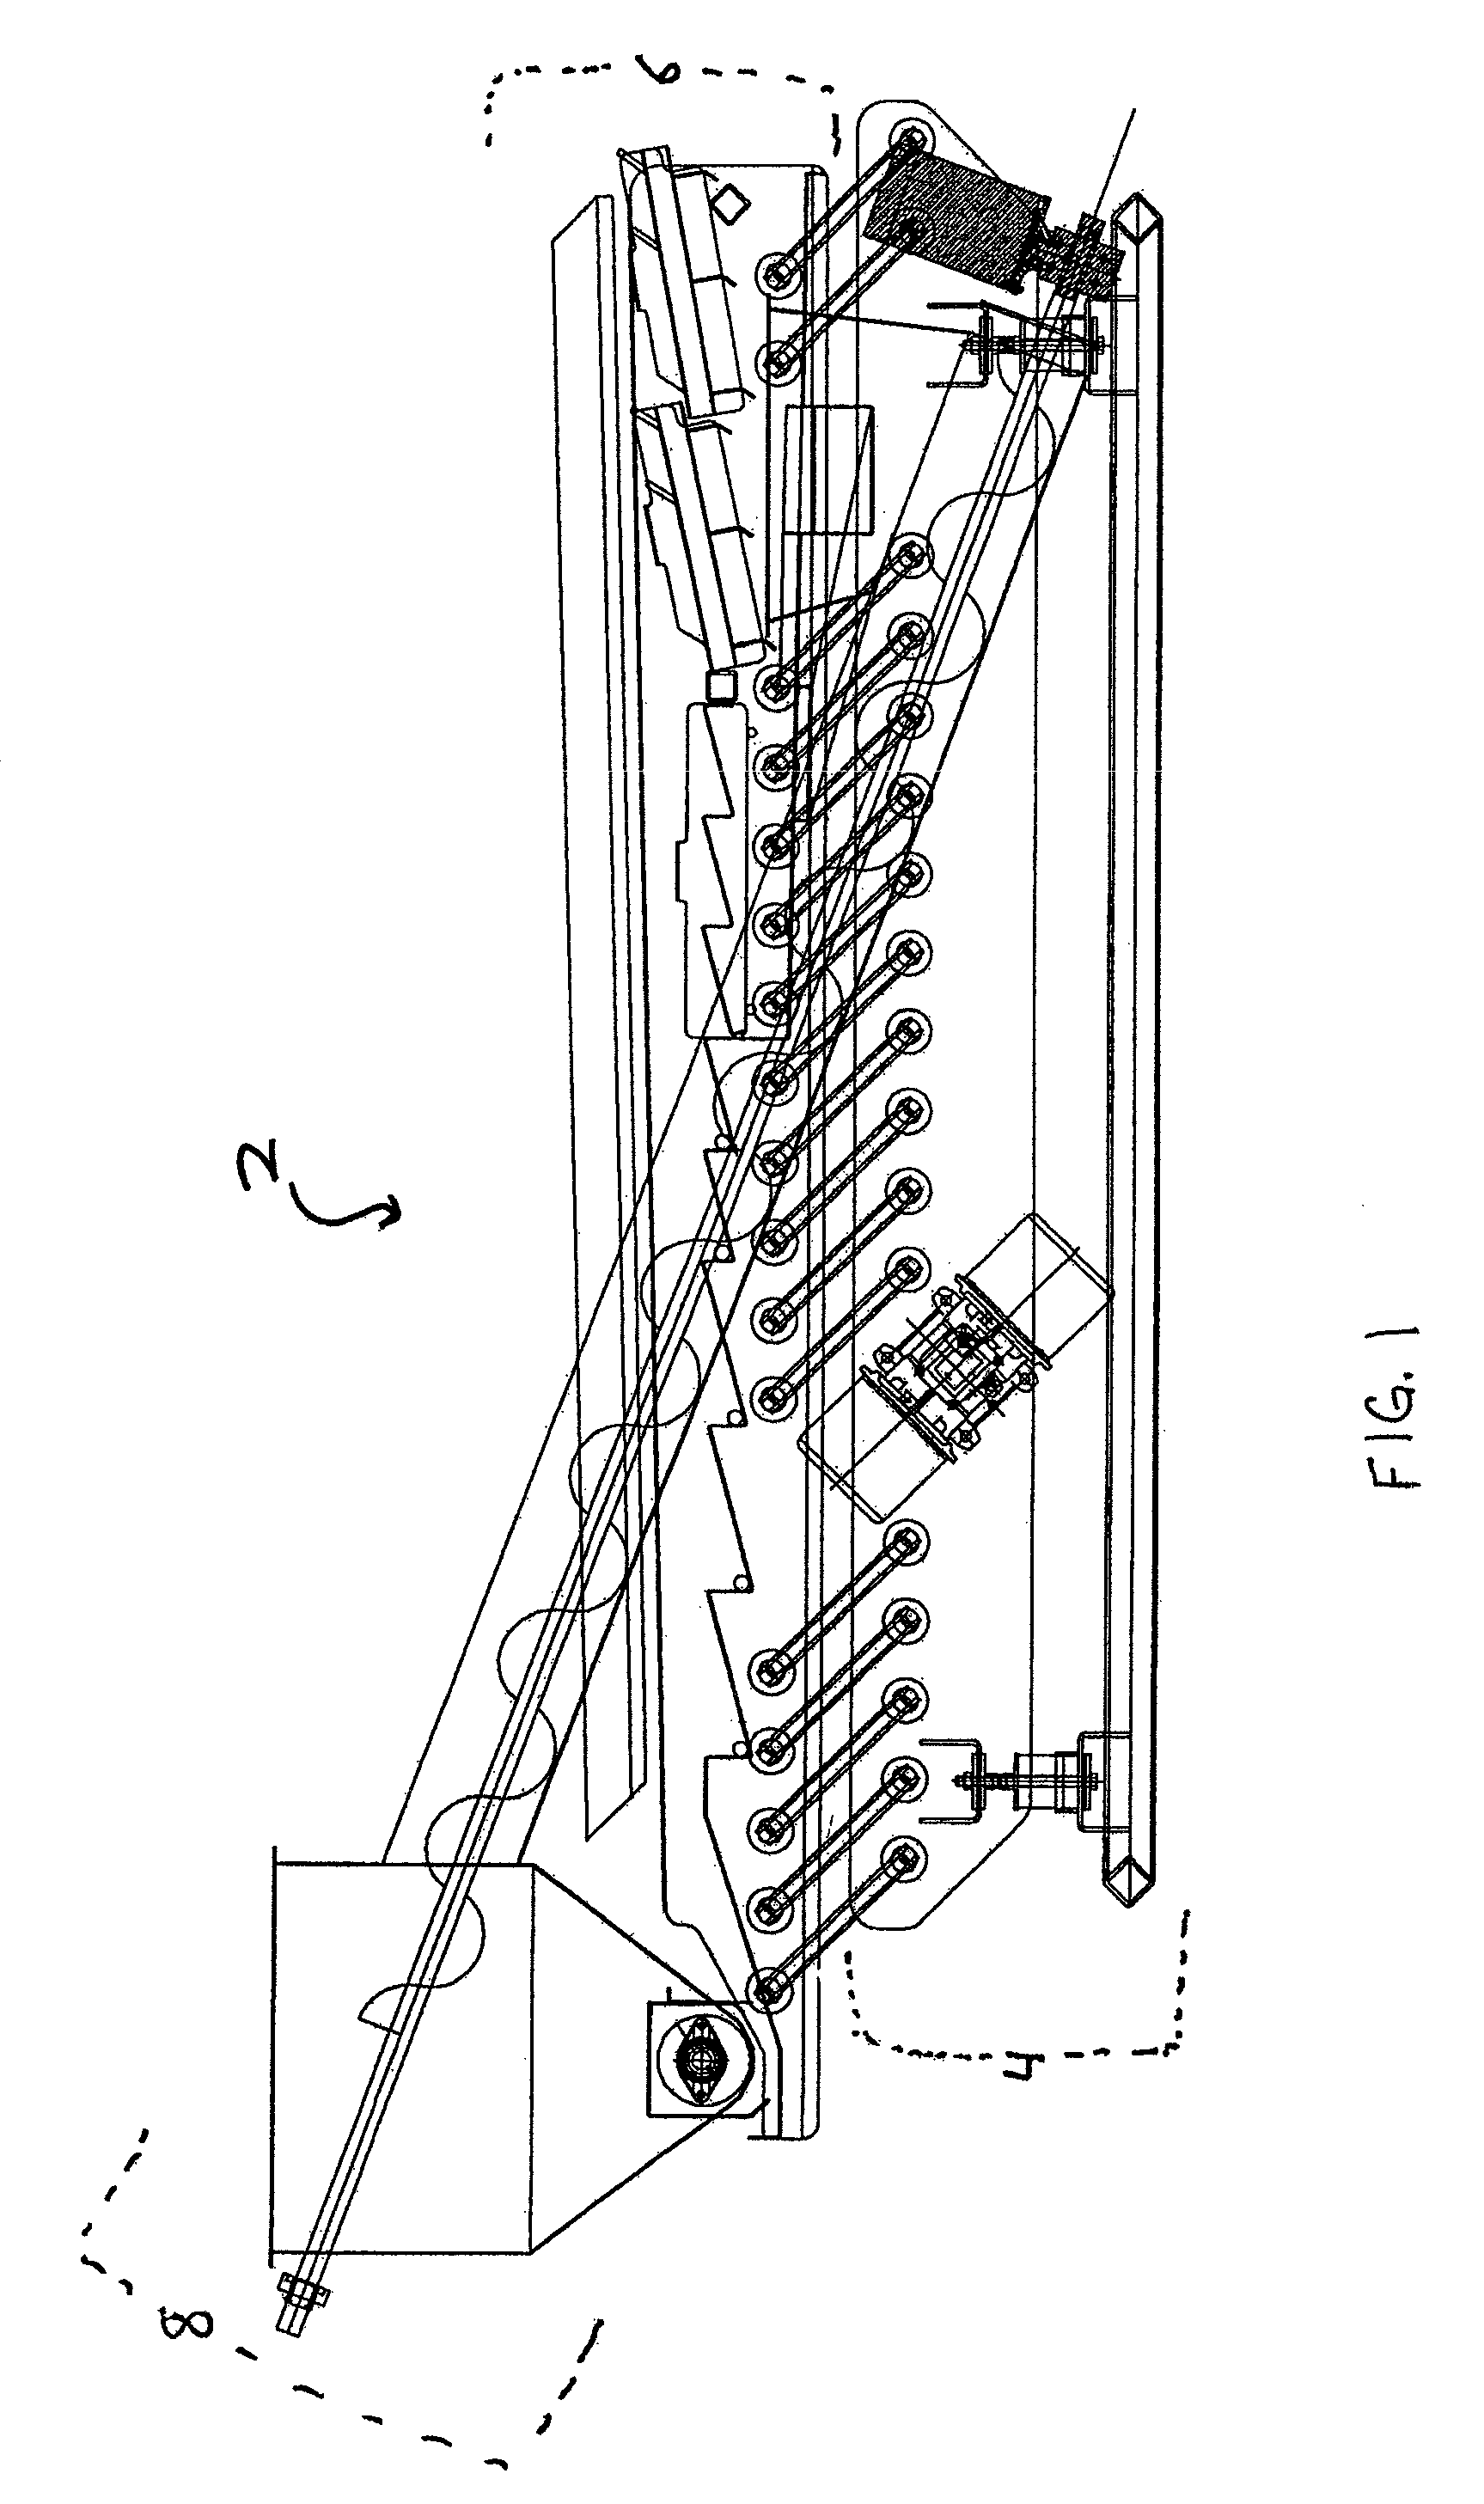 Apparatus for applying coating to products and methods of use thereof